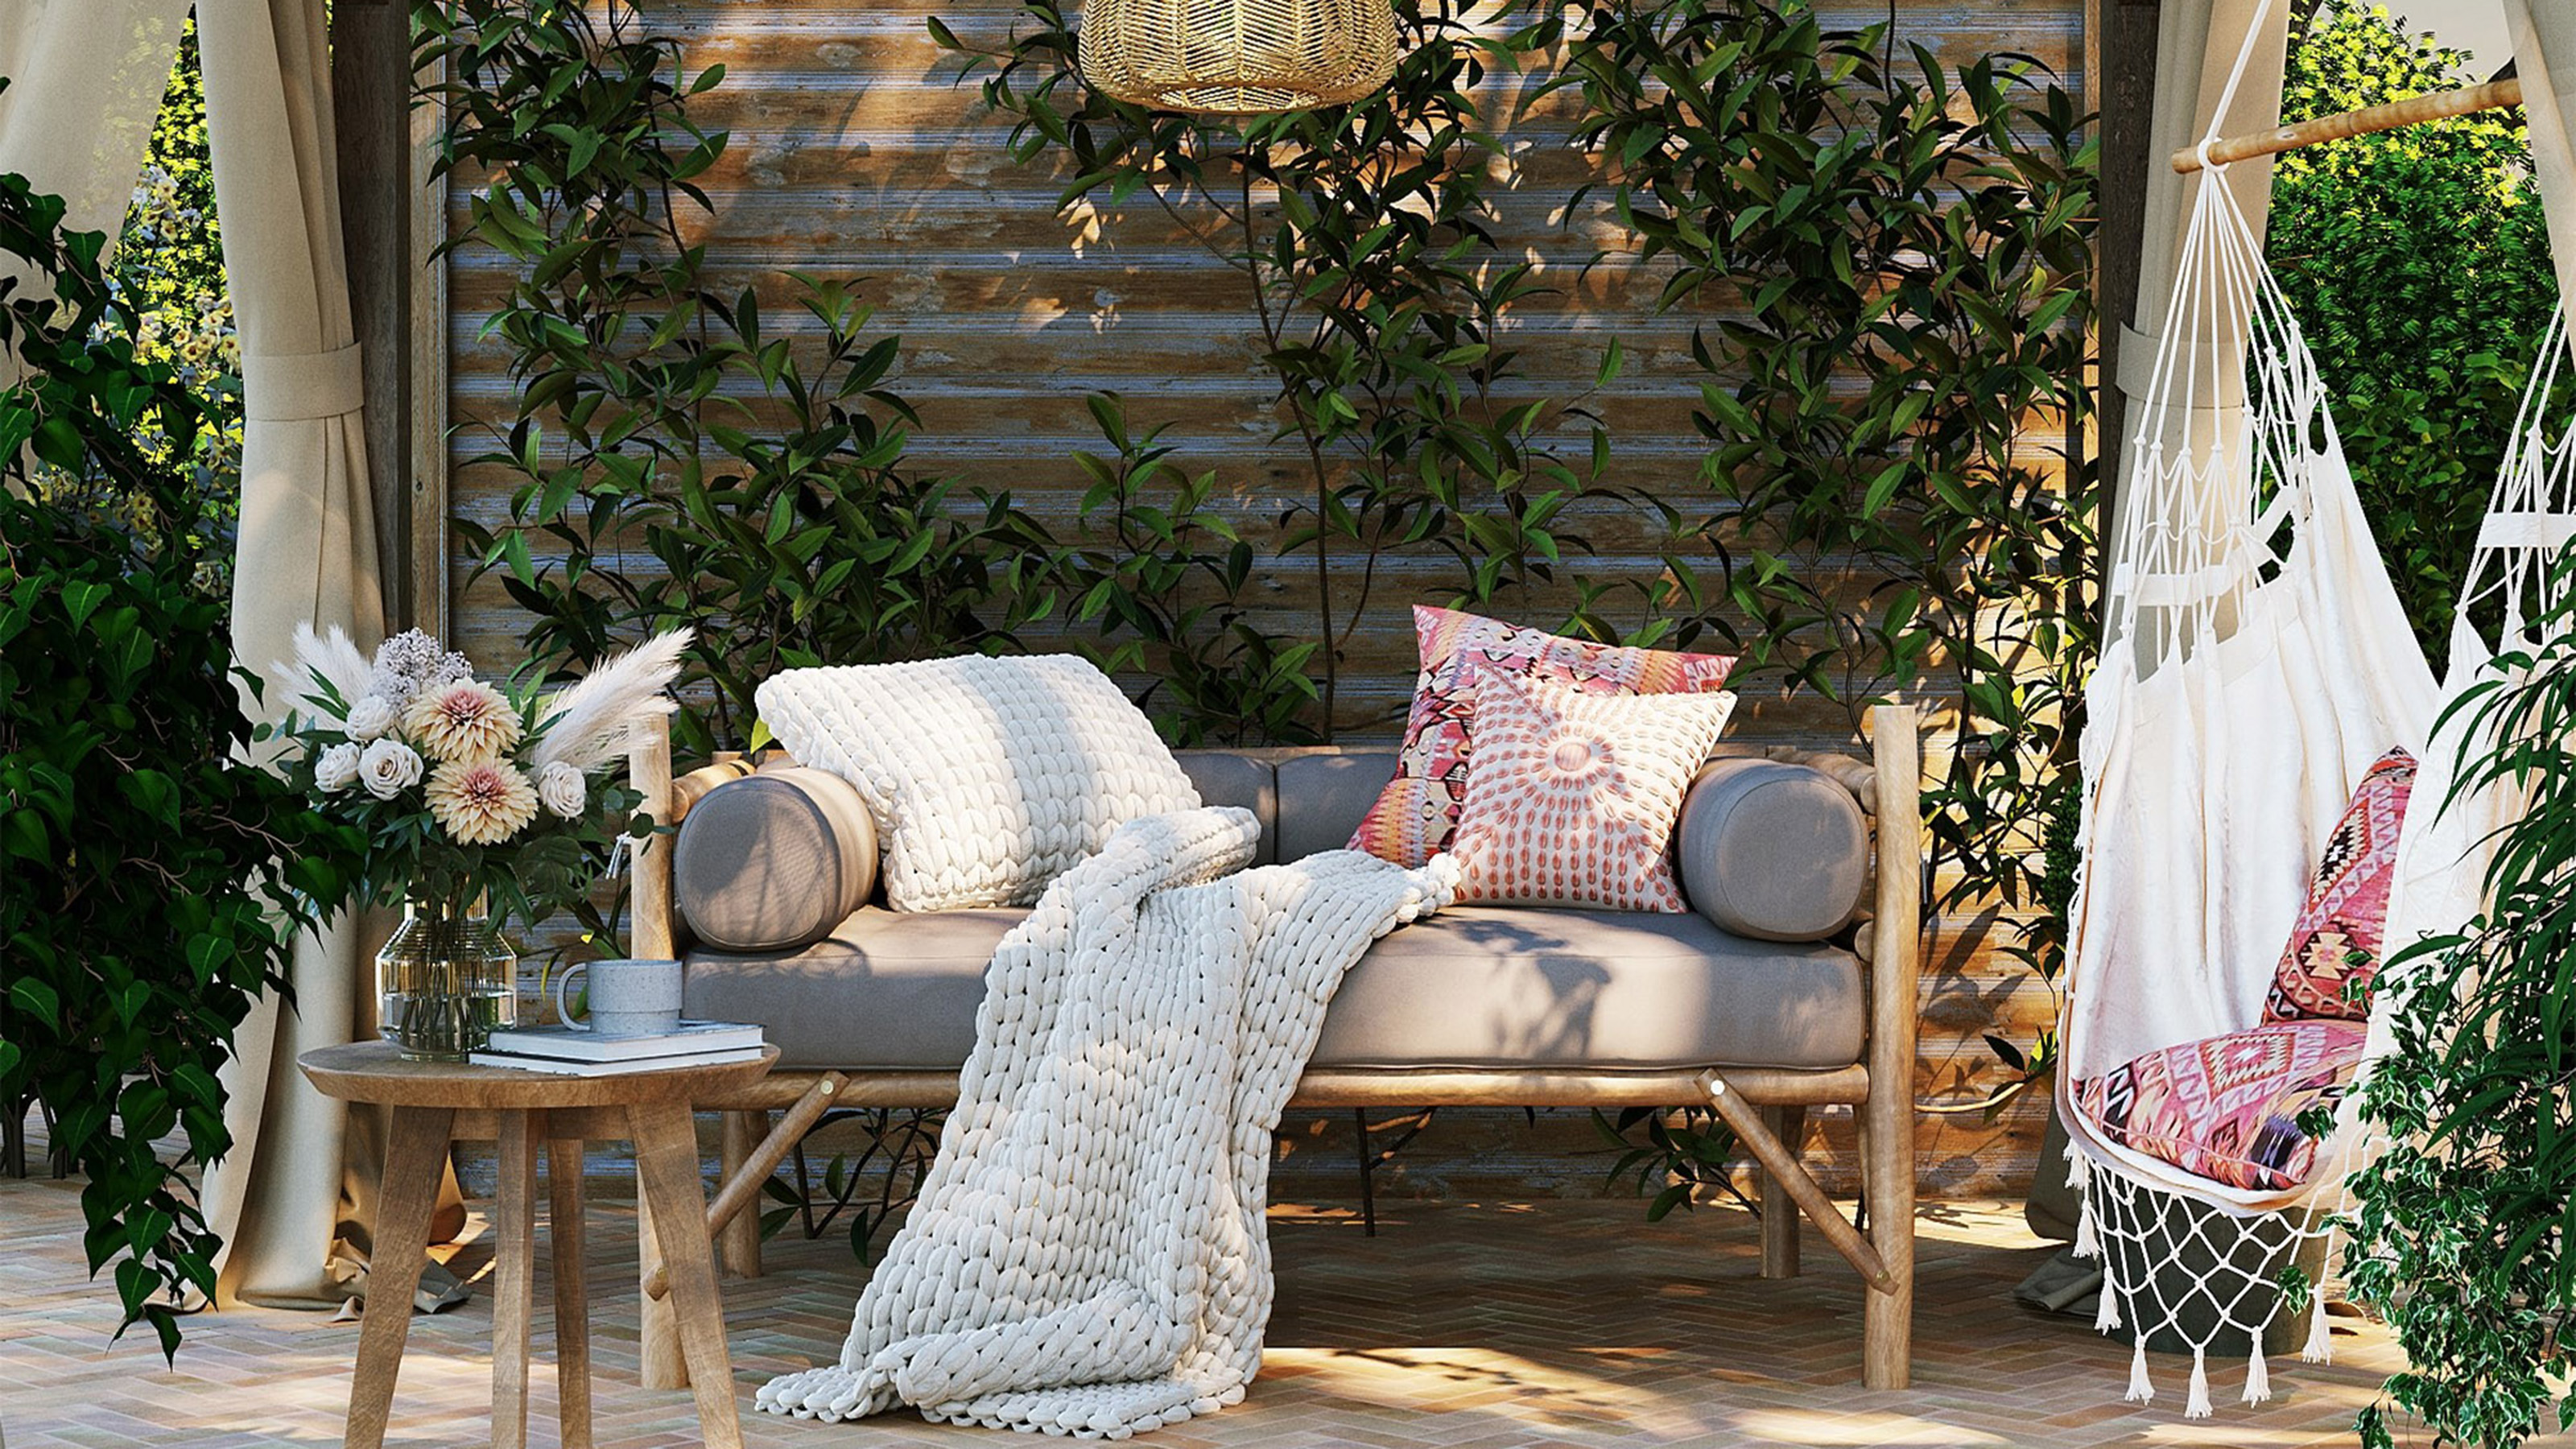 Patio decor ideas: 16 ways to spruce up your outdoor space ...